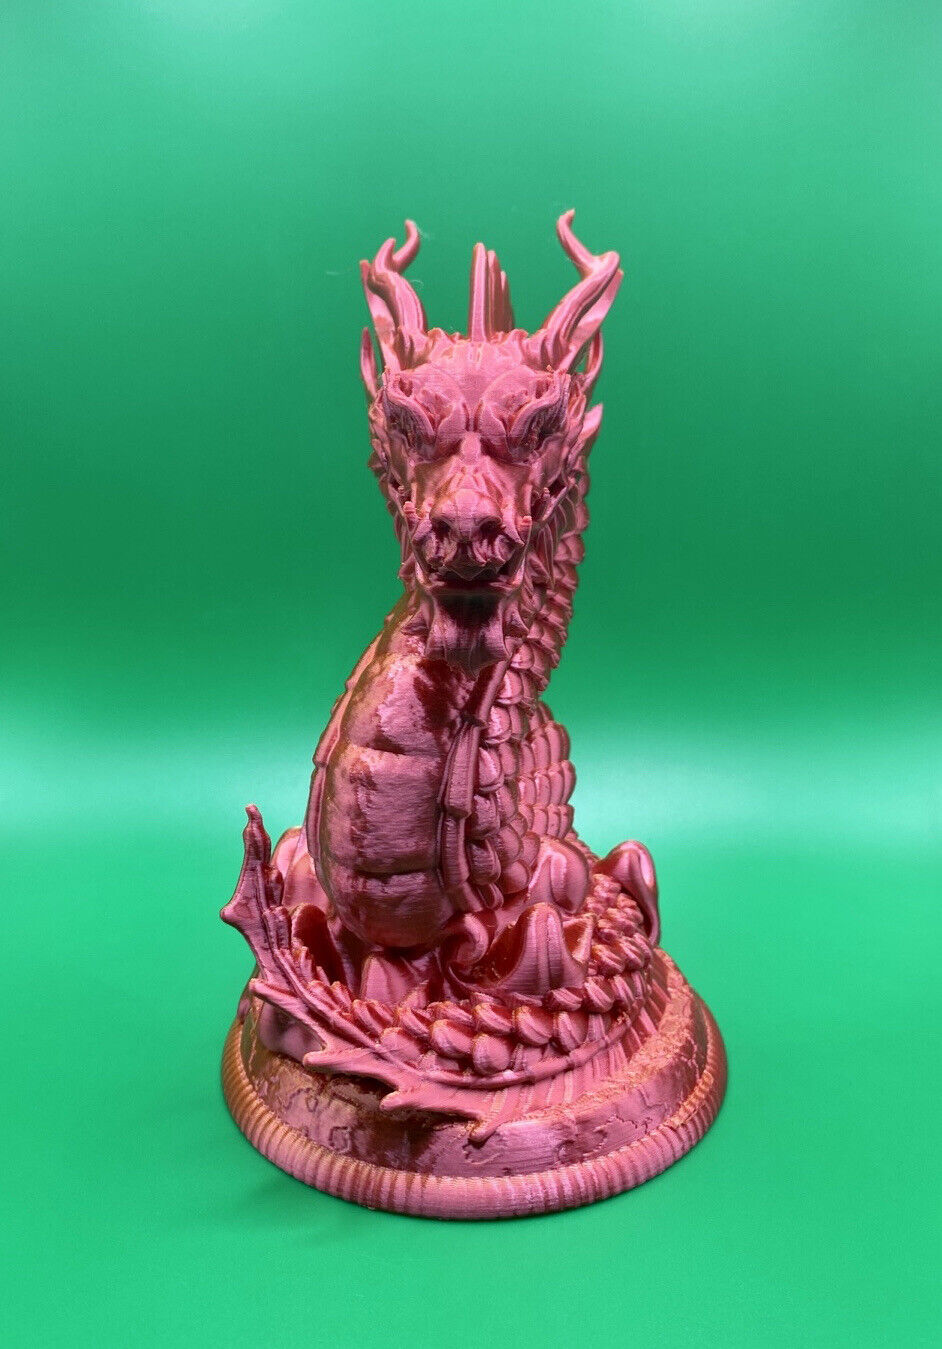 3D Printed Dragon Paintable Plastic Filament 7 Inches Tall